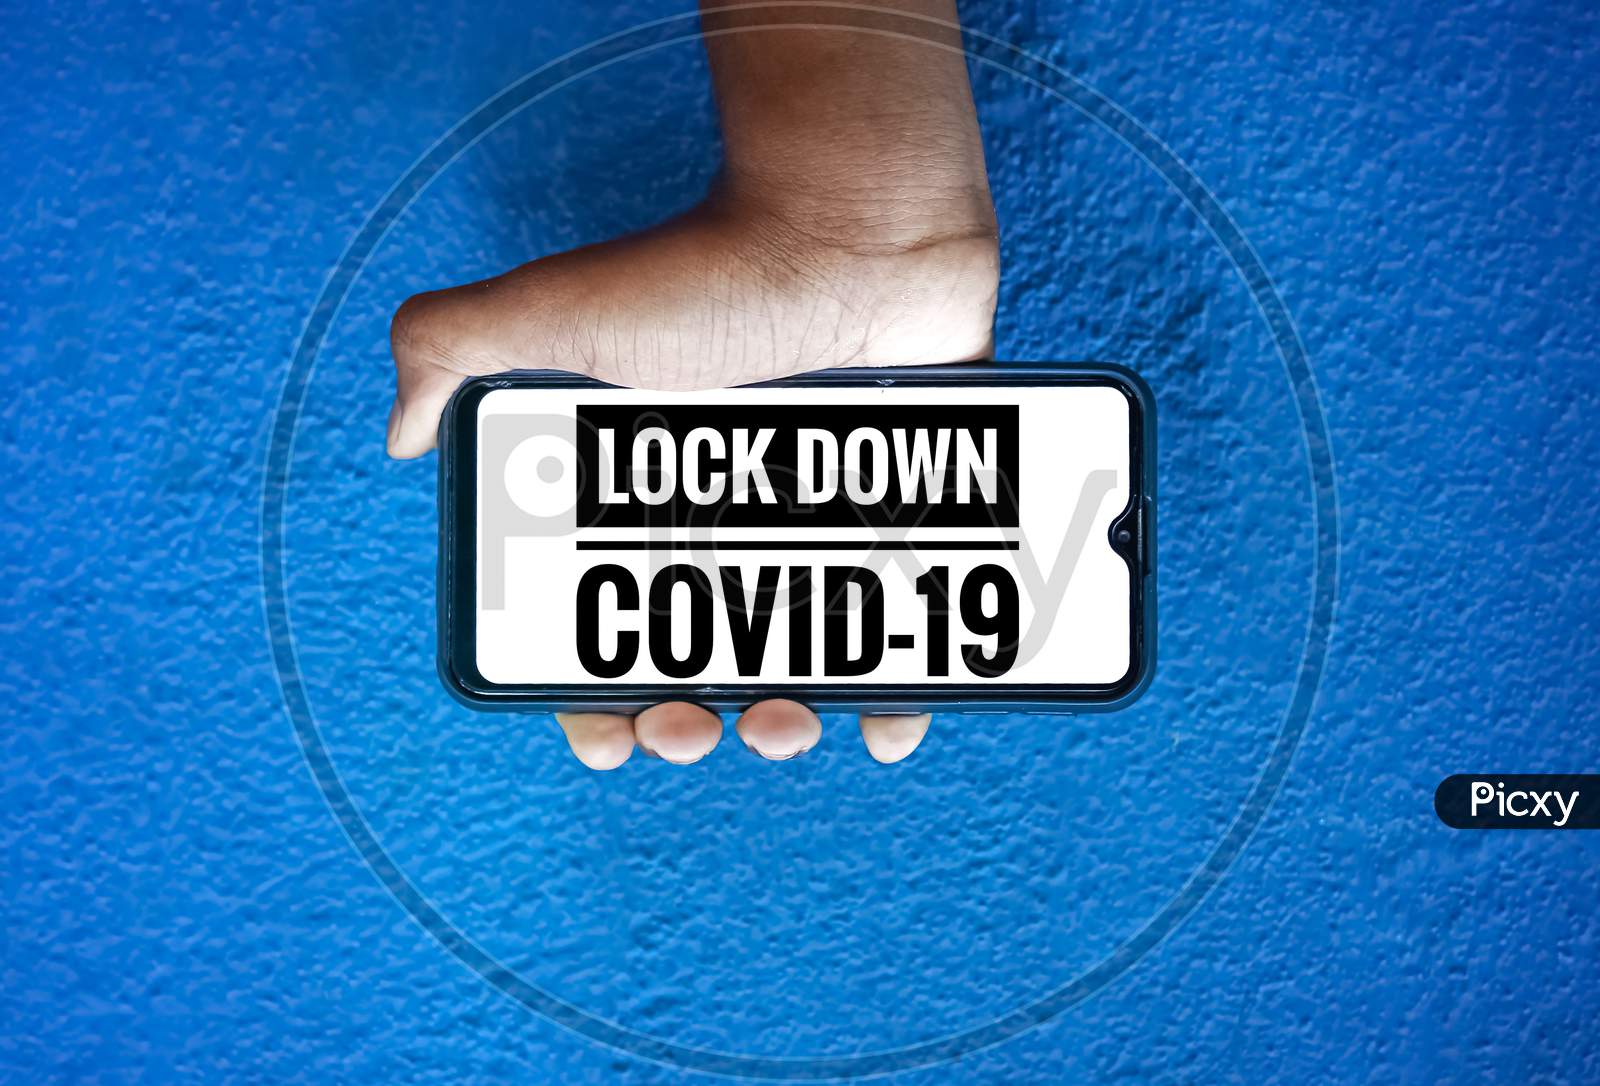 Lock Down Covid-19 Wording On Smart Phone Screen Isolated On Blue Background With Copy Space For Text. Person Holding Mobile On His Hand And Showing Front Of The Lock Down Corona Virus Screen.